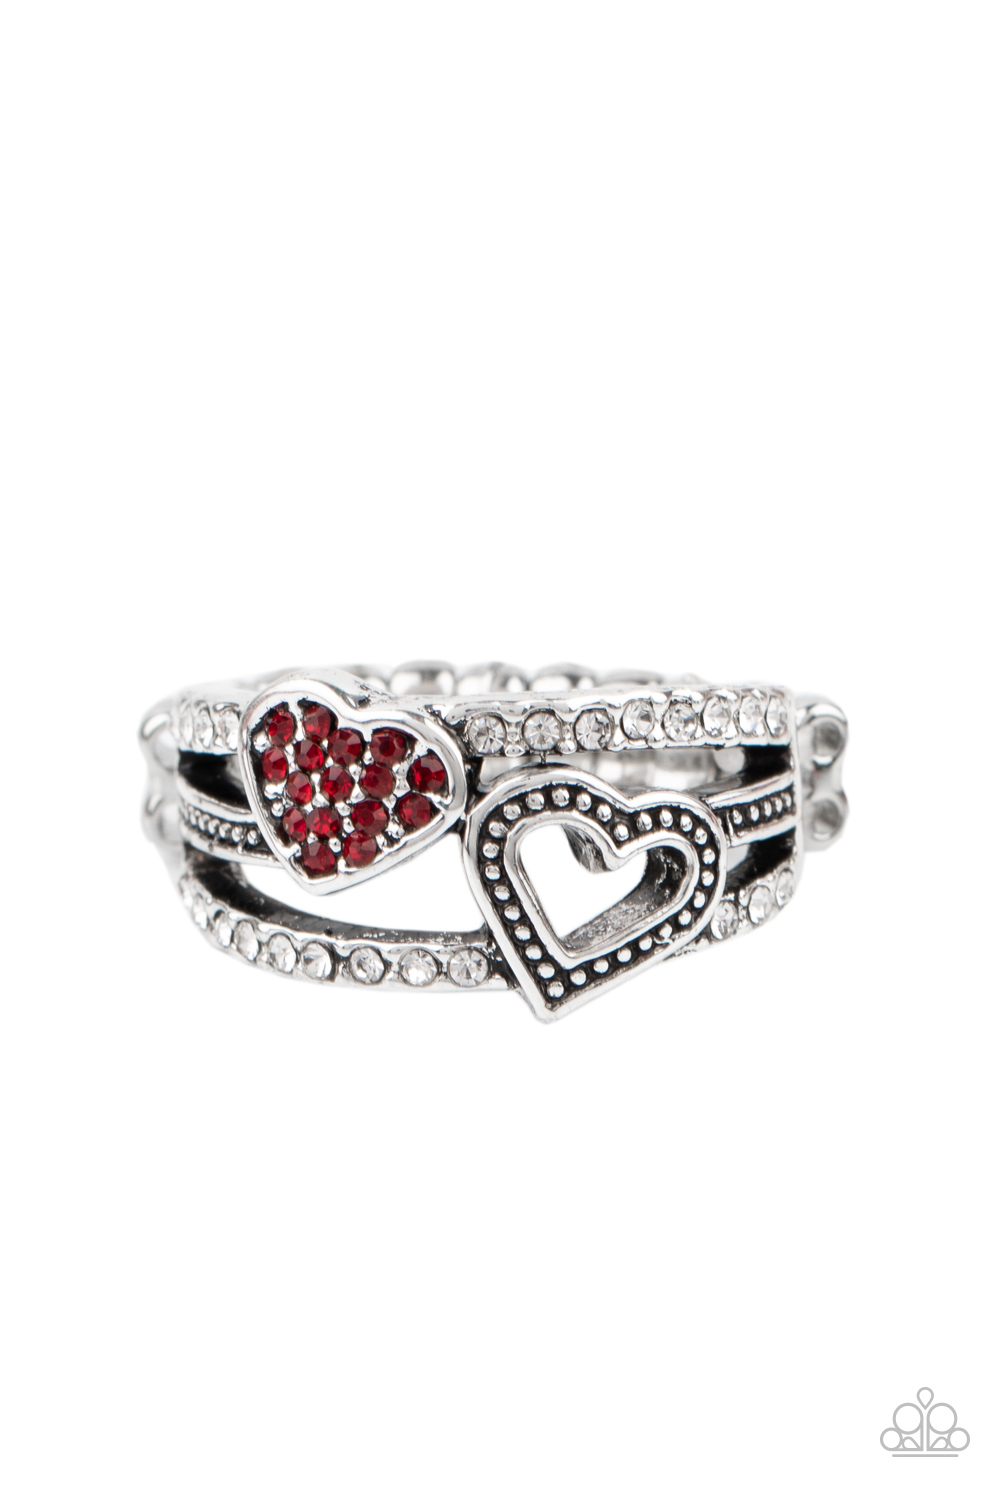 Ring - You Make My Heart BLING - Red